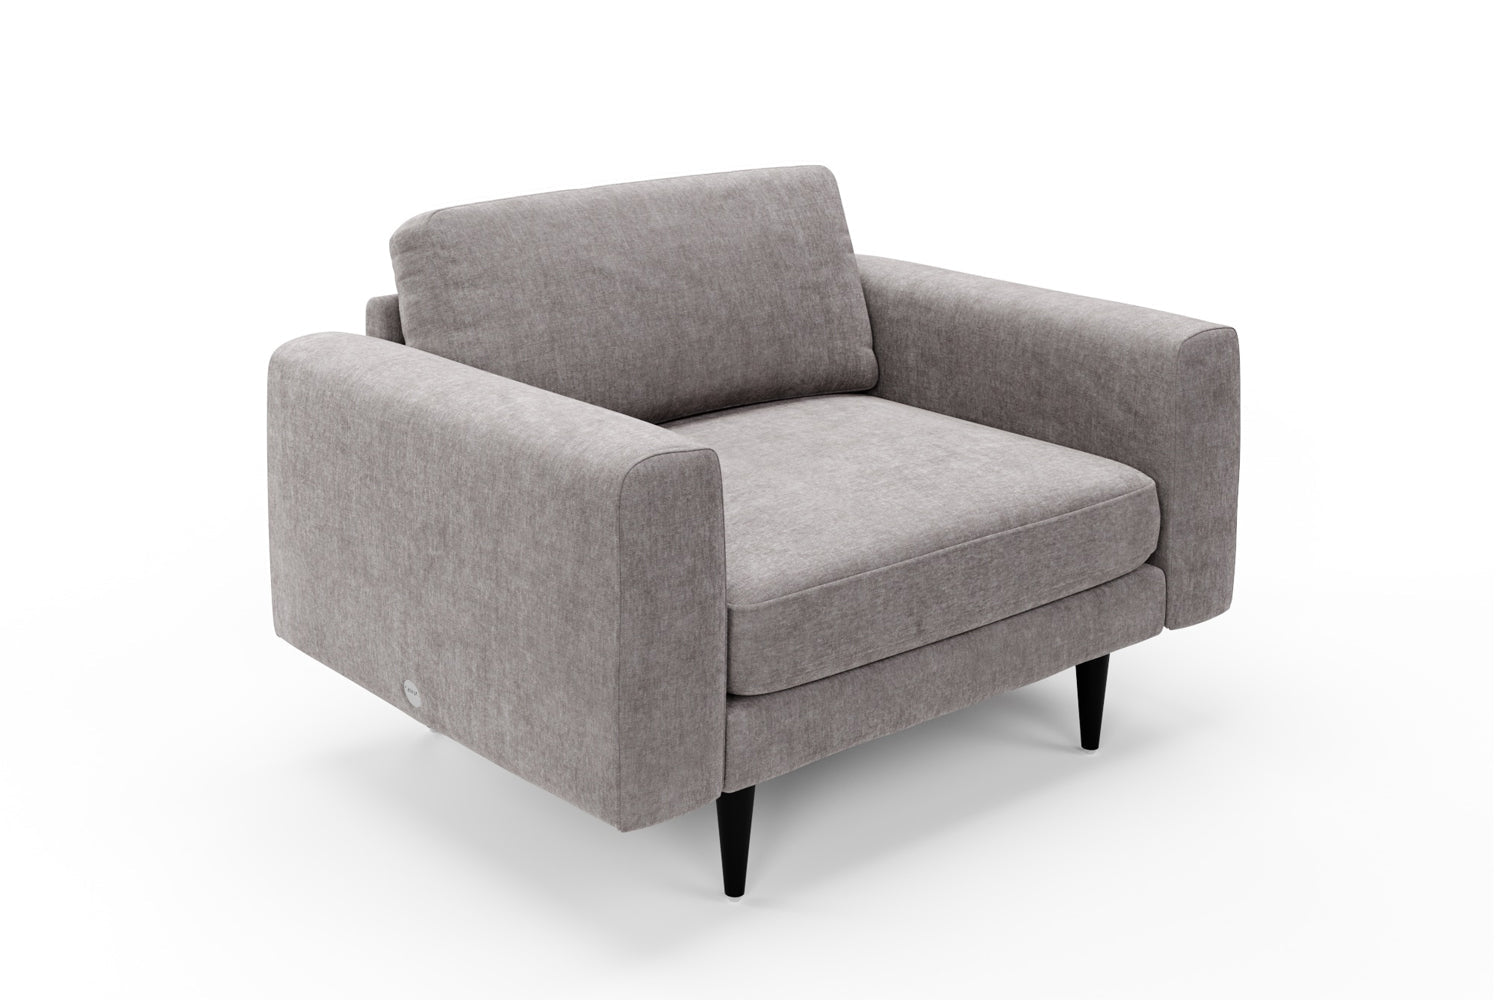 SNUG | The Big Chill 1.5 Seater Snuggler in Mid Grey